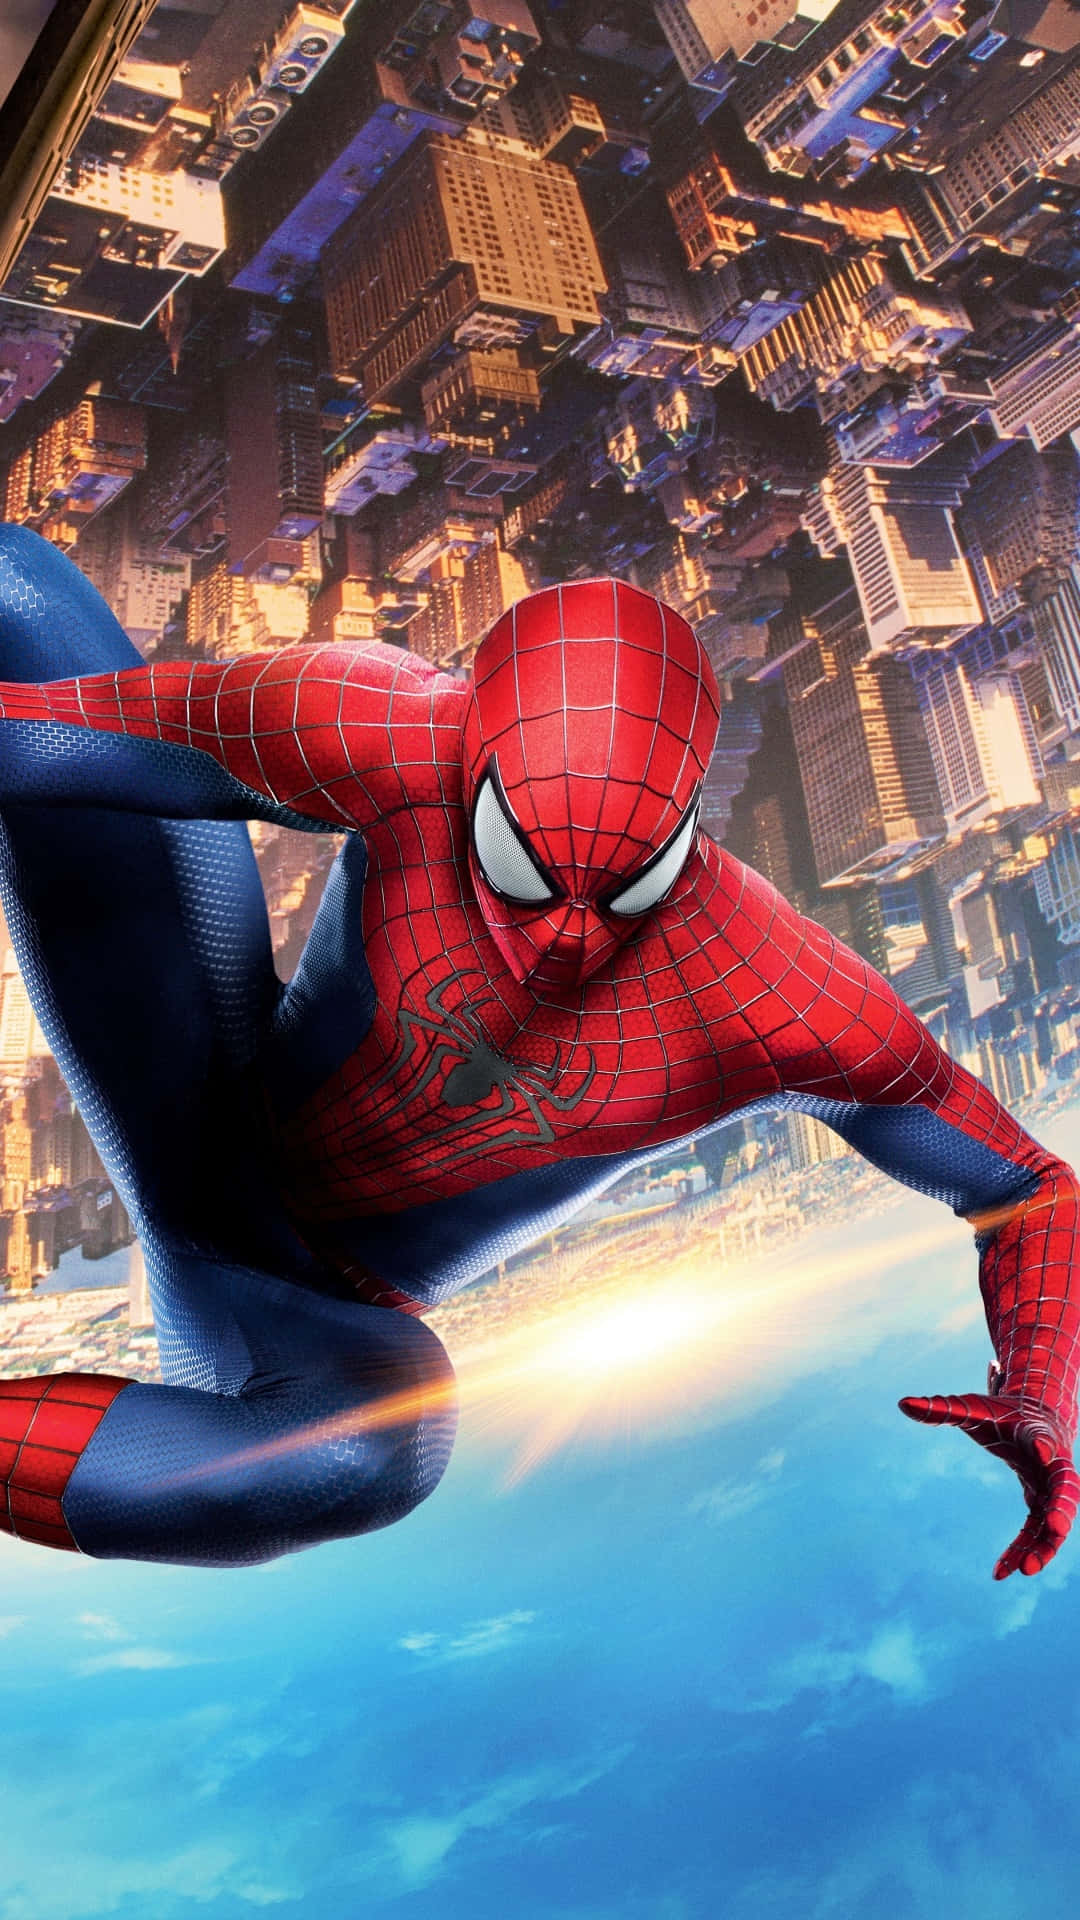 The Spider - Man Is Flying Over A City Wallpaper